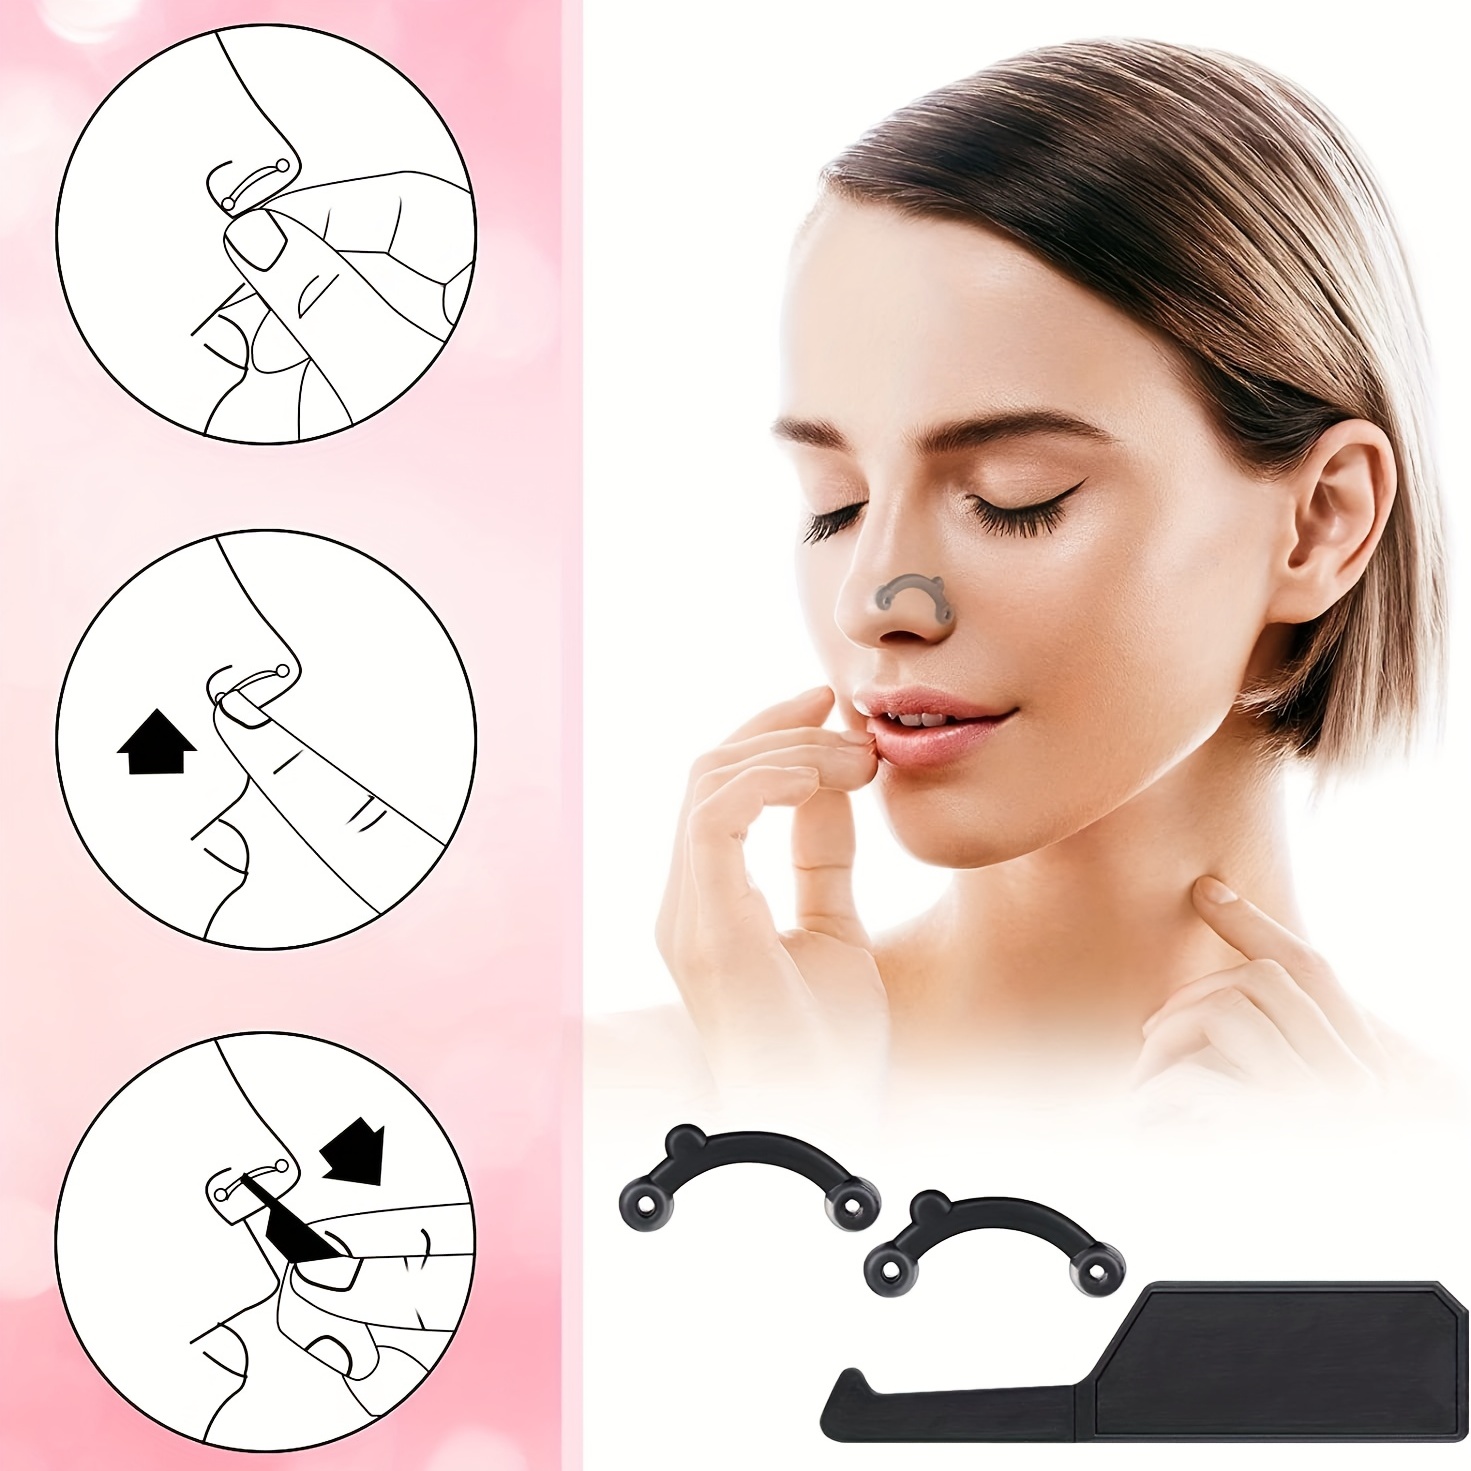 Magic Nose Shaper Clip Nose Up Lifting Shaping Bridge Straightening Slimmer  Device No Painful Silicone Nose